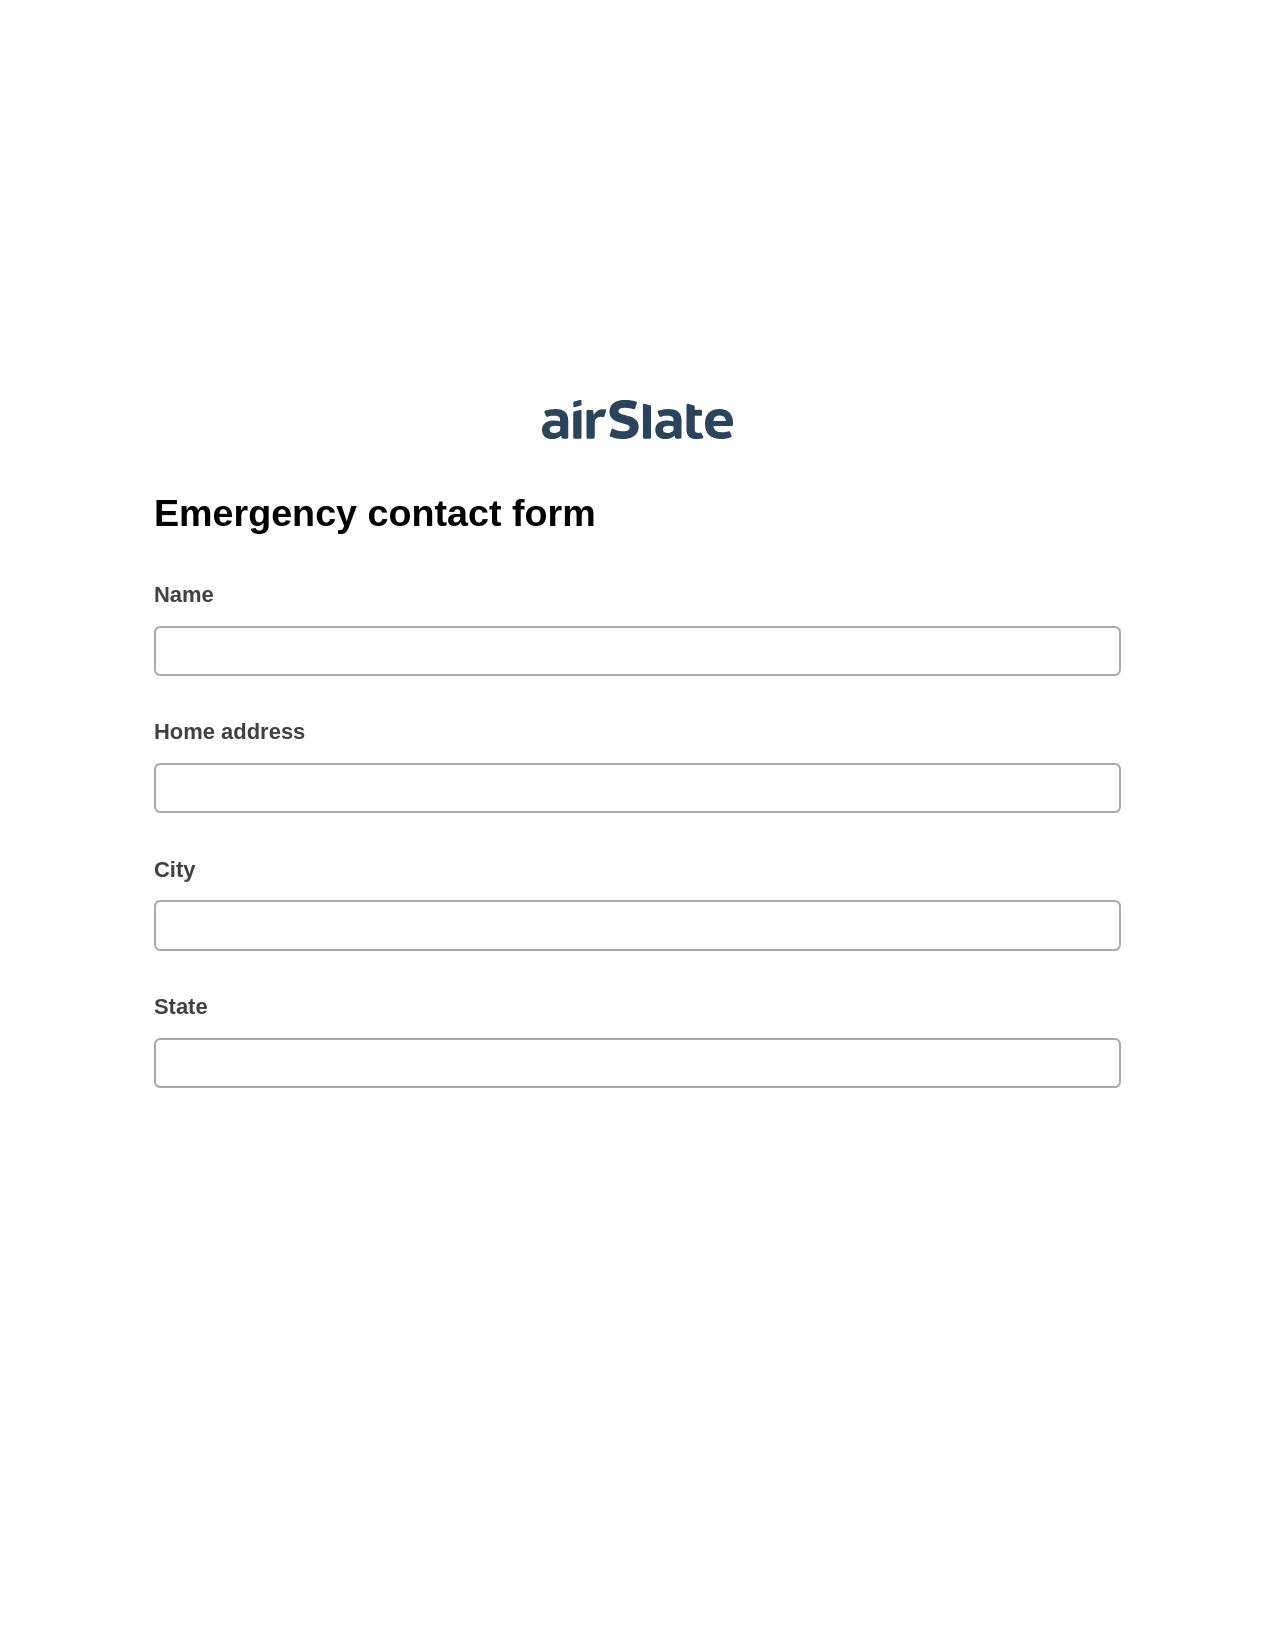 Multirole Emergency contact form Pre-fill Slate from MS Dynamics 365 Records Bot, Mailchimp send Campaign bot, Text Message Notification Postfinish Bot